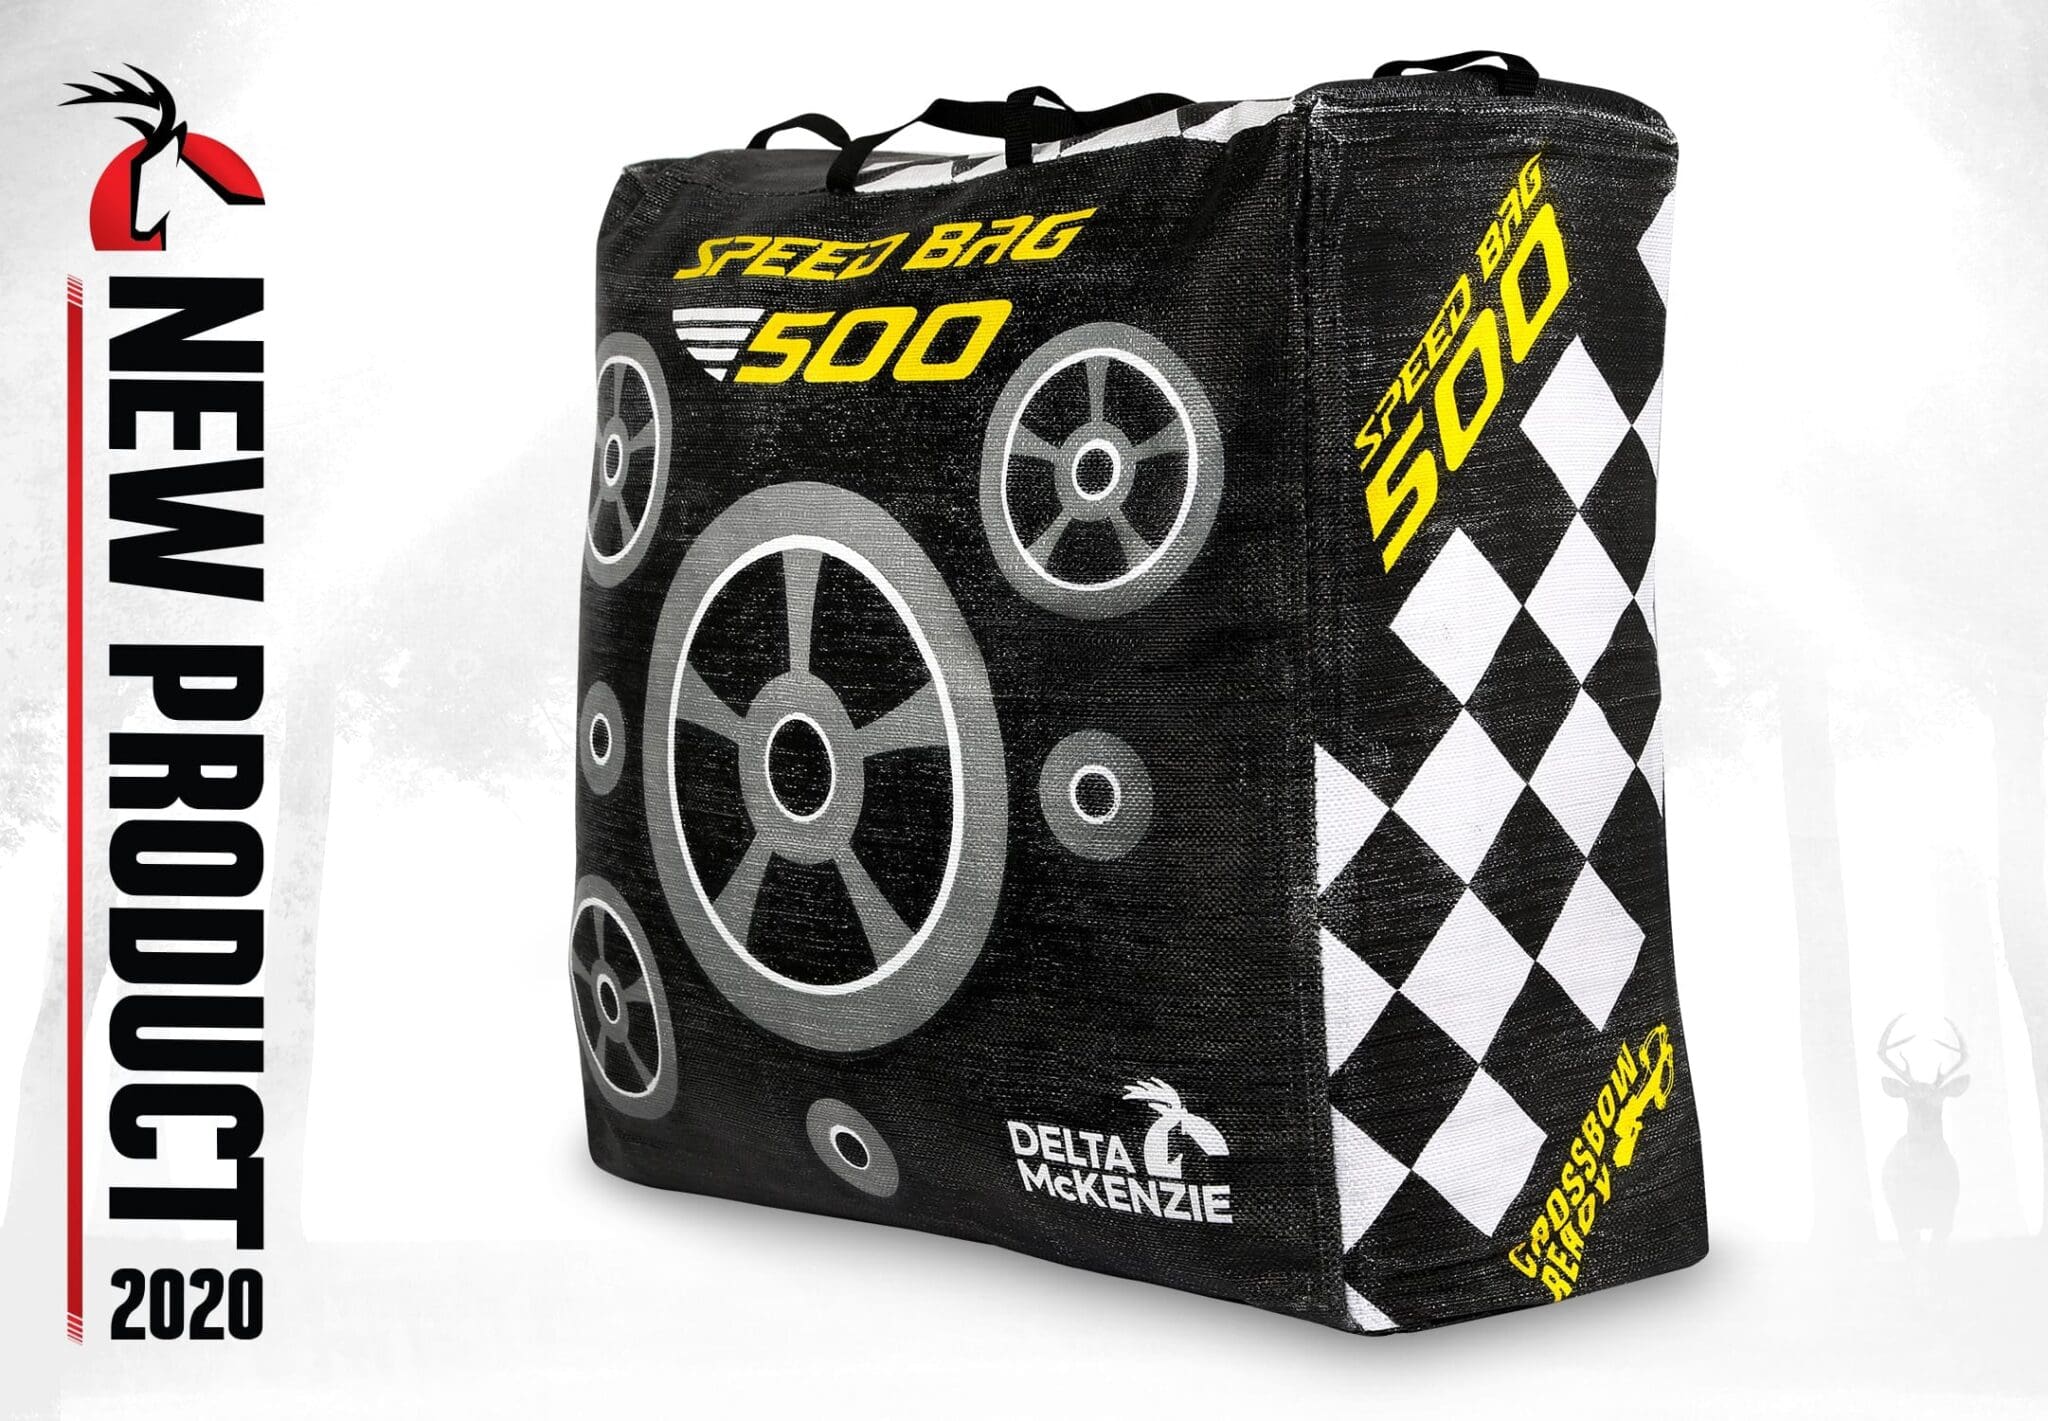 NEW SPEED BAG 500—IDEAL FOR TODAY’S HIGH-PERFORMACE BOWS & CROSSBOWS